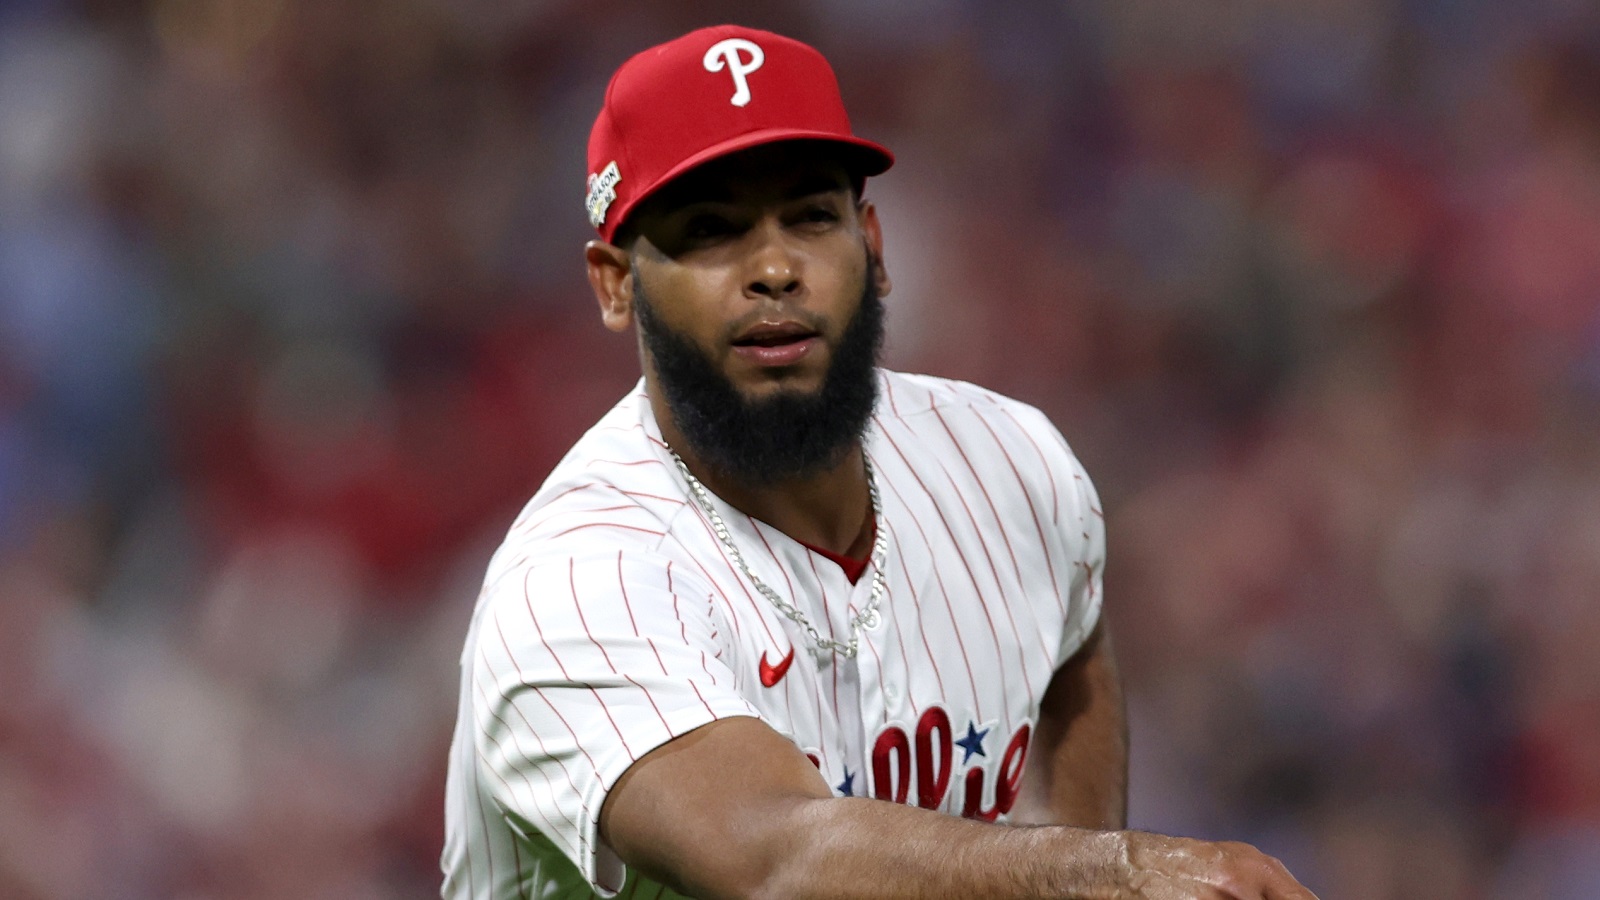 Phillies Sign Seranthony Dominguez, Who Won't Pitch in 2021